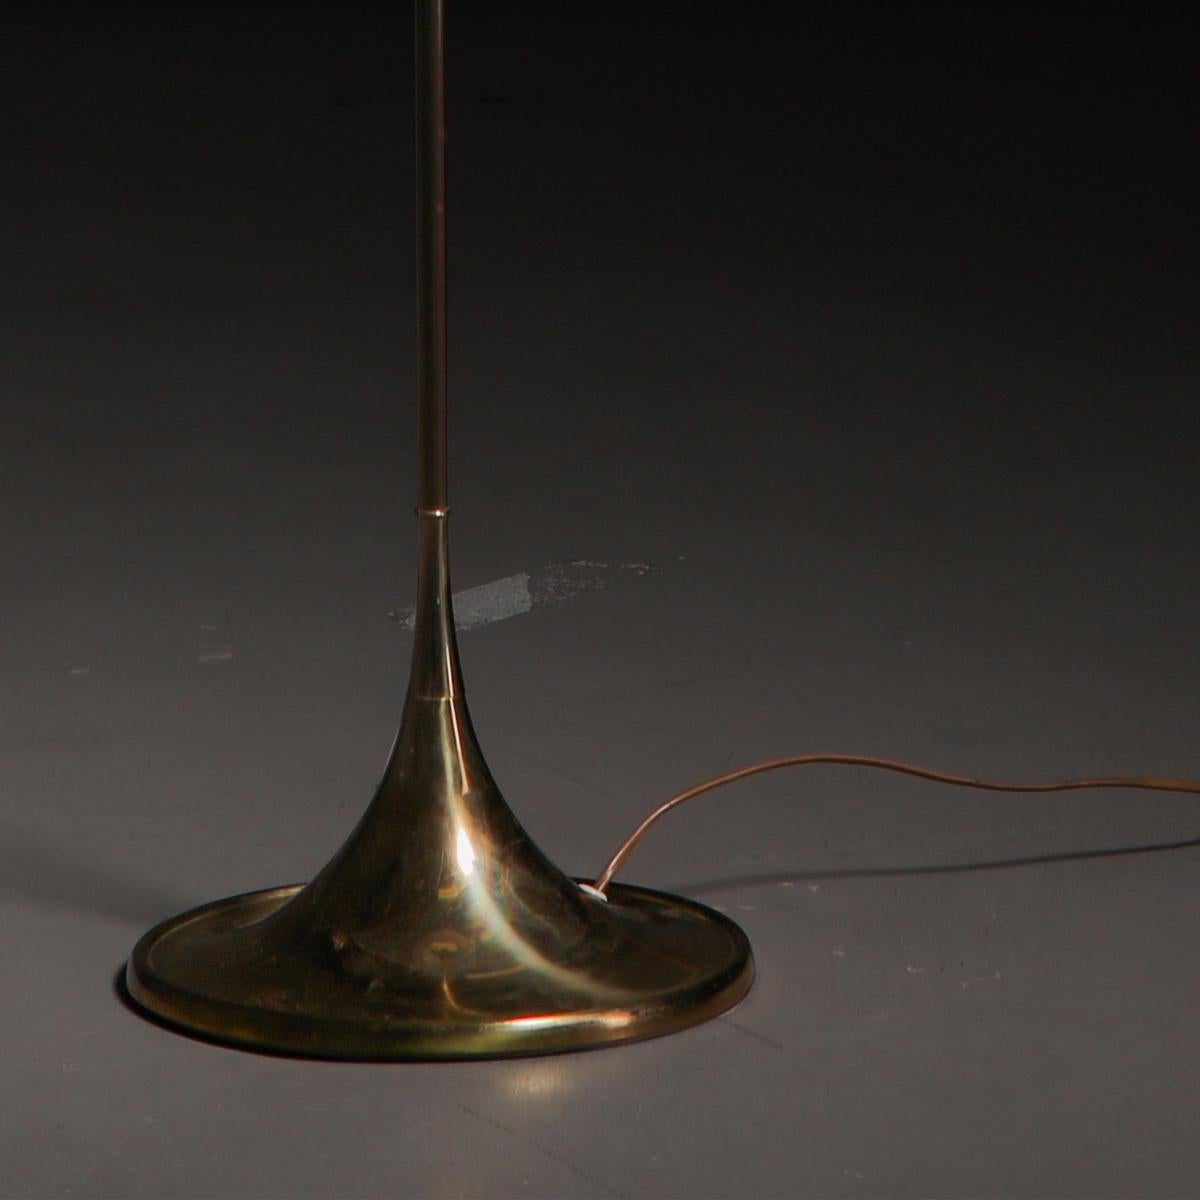 Swedish brass floor lamp, model G-024, designed by Alf Svensson and Yngvar Sandström and manufactured by Bergboms in Sweden, 1960s.

This elegant and rare Swedish brass floor lamp was designed by Alf Svensson and Yngvar Sandström and manufactured by